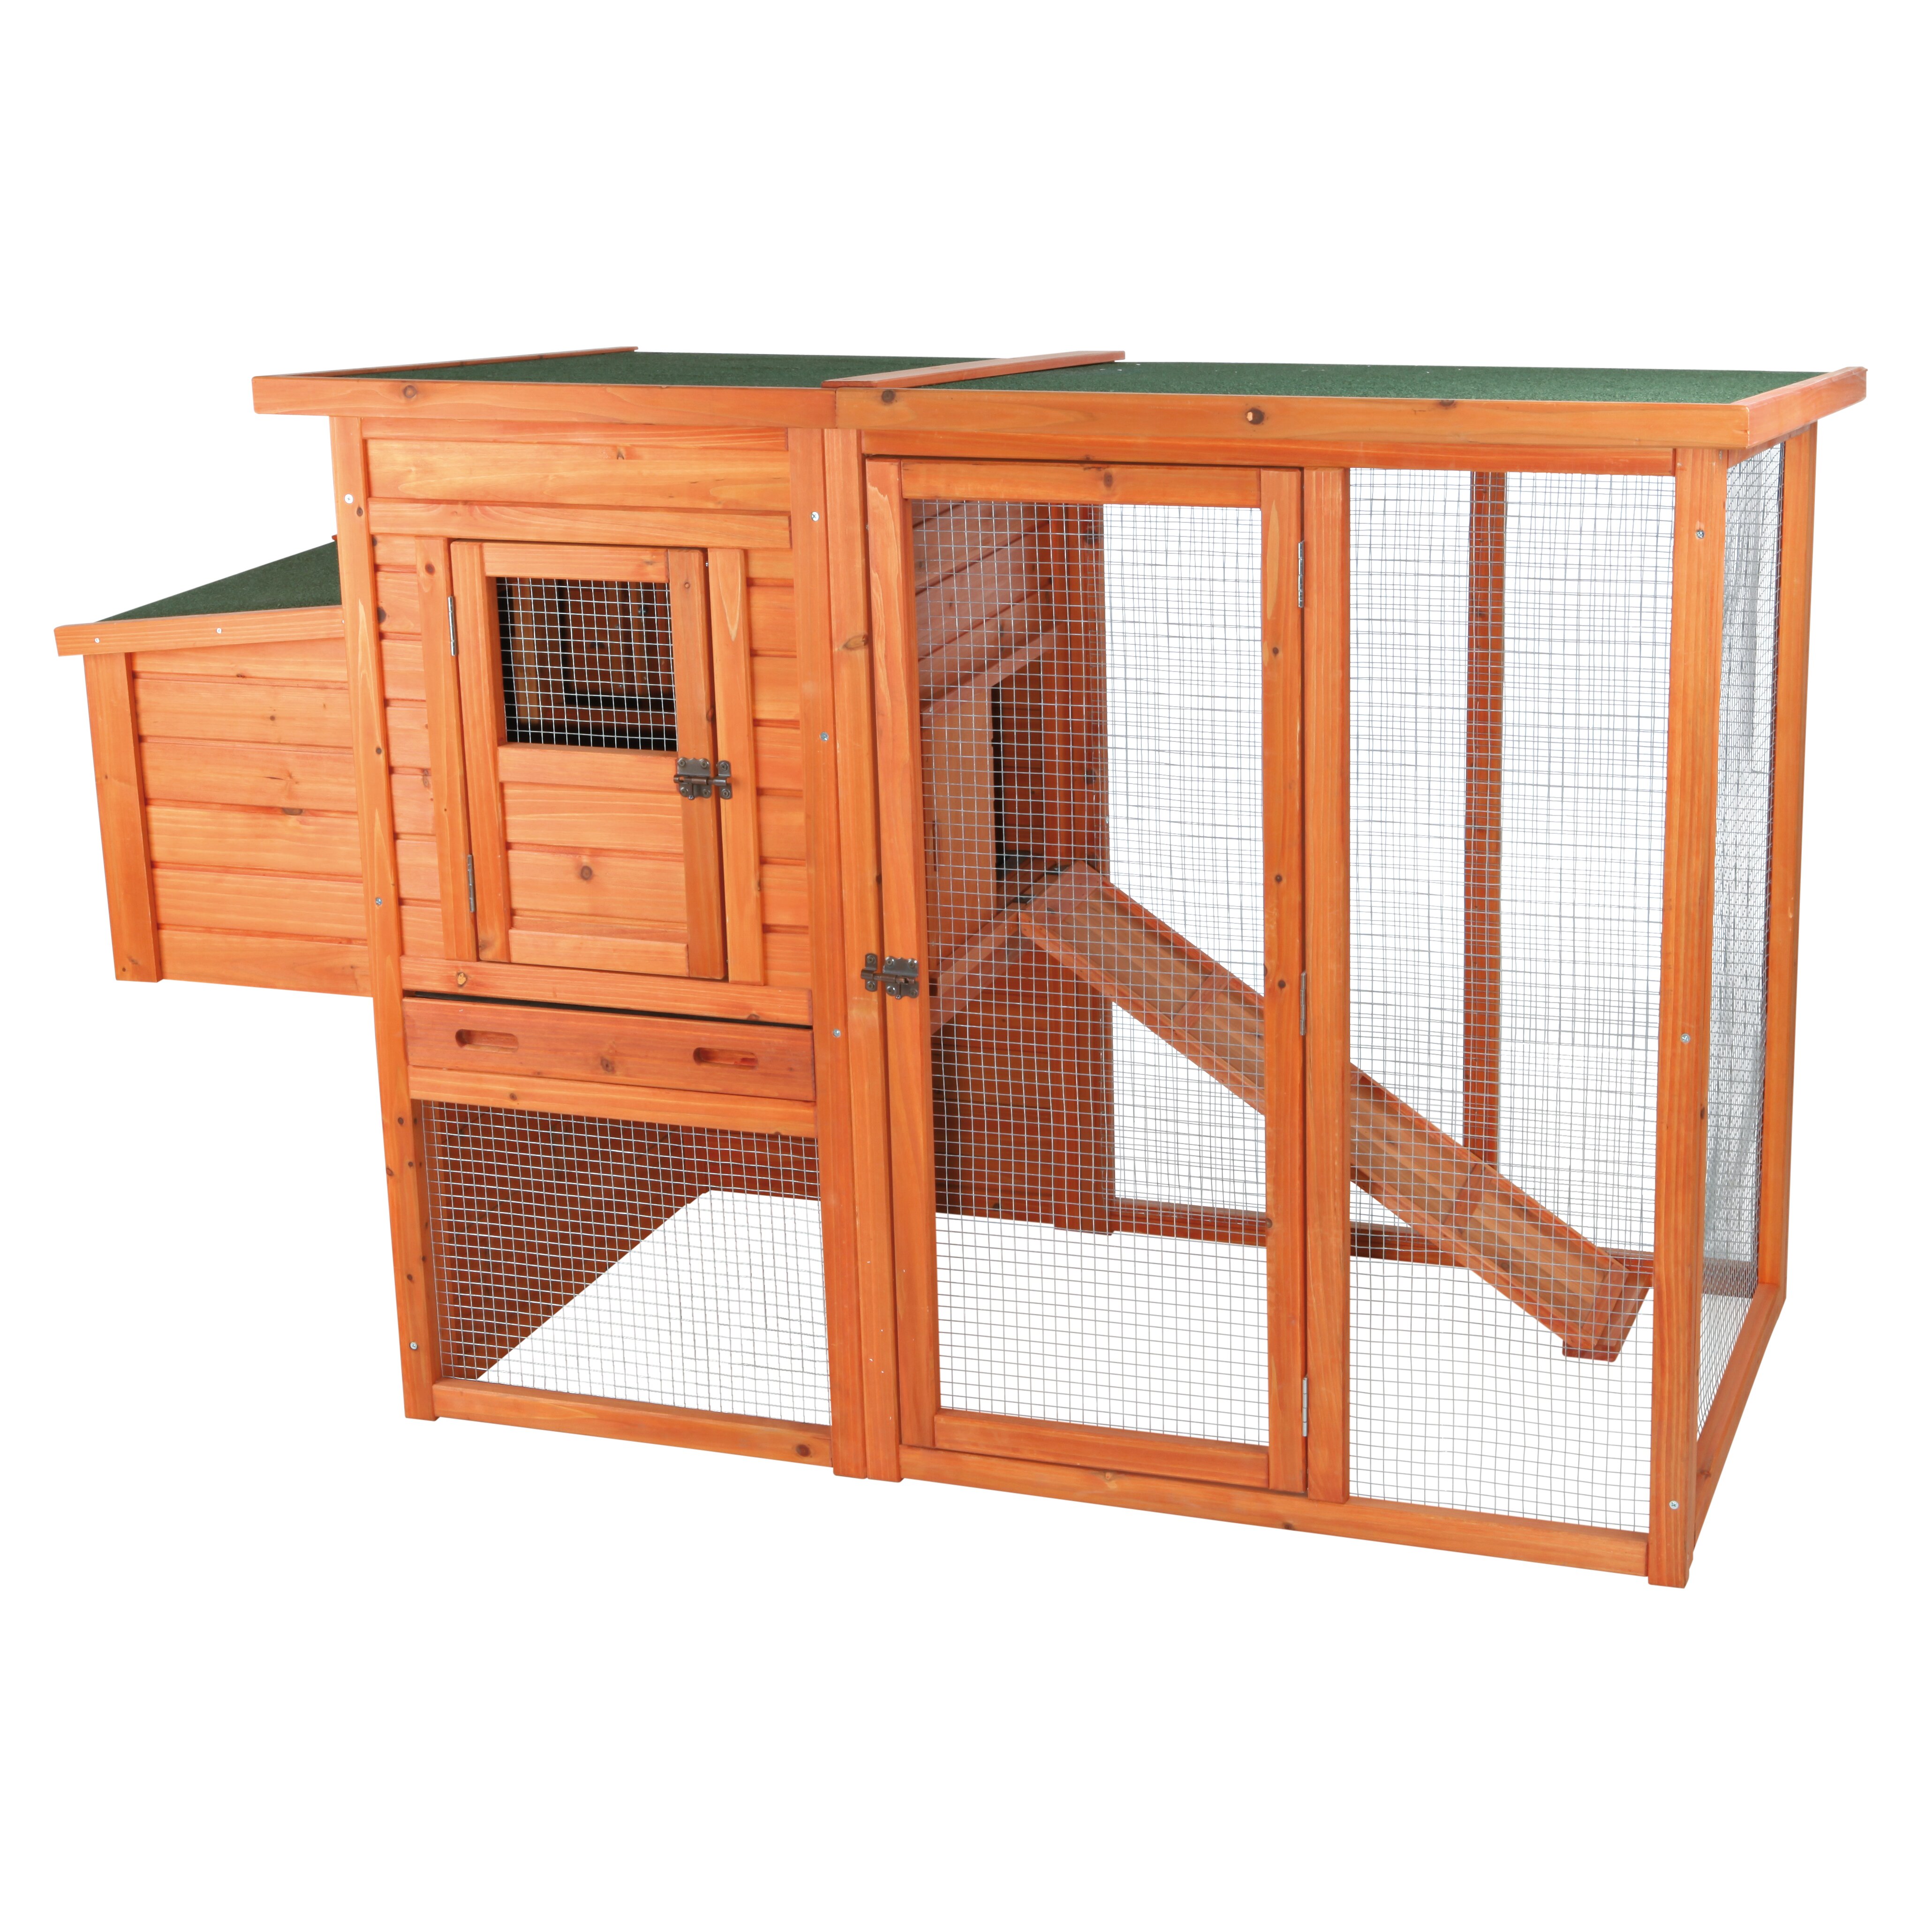 Trixie Trixie Chicken Coop with Outdoor Run &amp; Reviews 